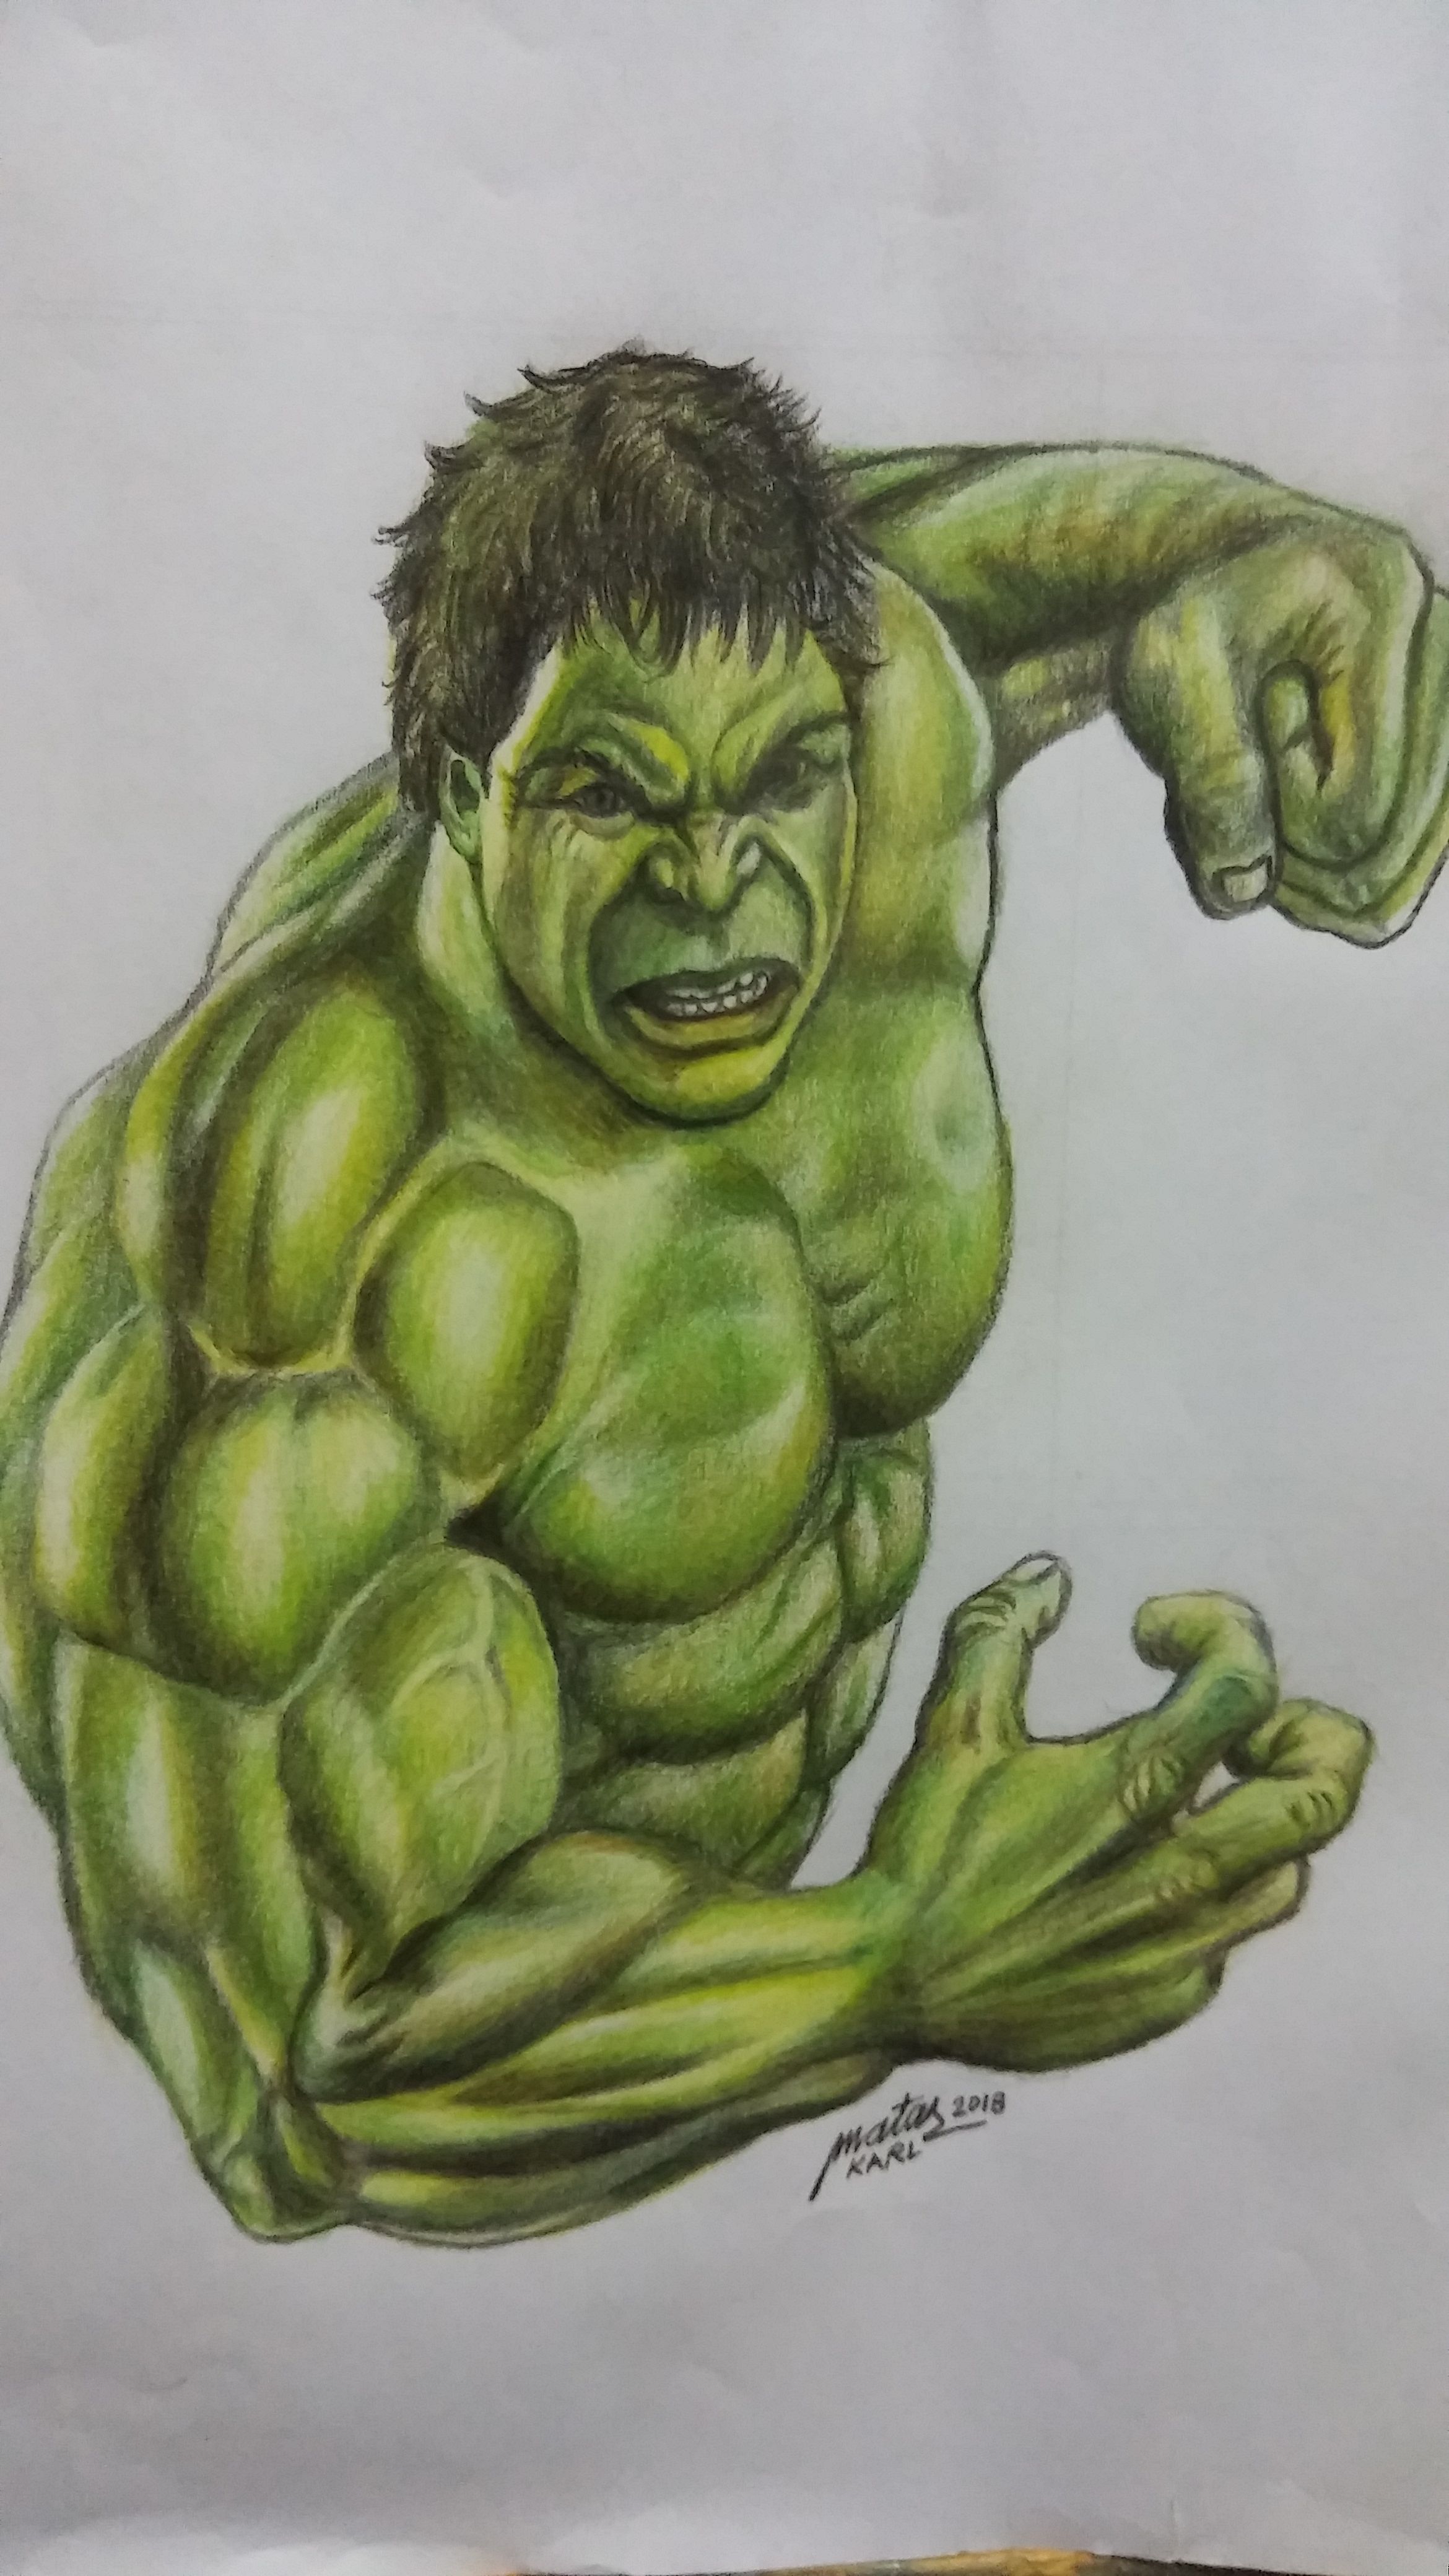 How to Draw Angry Hulk (The Hulk) Step by Step | DrawingTutorials101.com